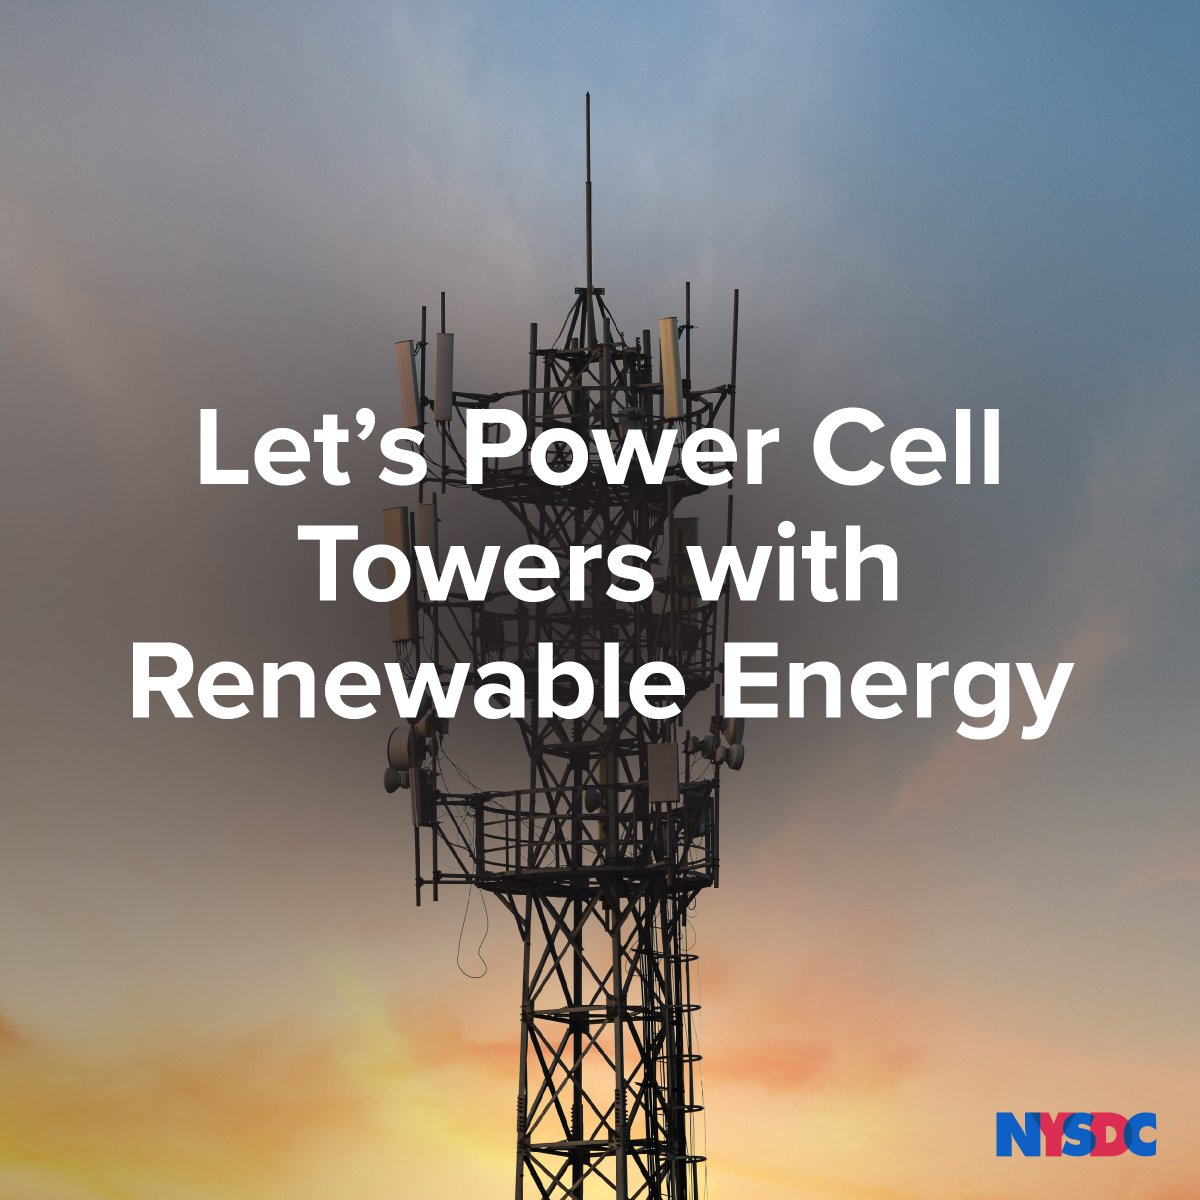 'I am proud to sponsor a bill (S.4305) that would require cellular providers and third-party tower owners to provide plans for converting energy usage in cell towers to renewable energy resources.' - @kevinparkernyc